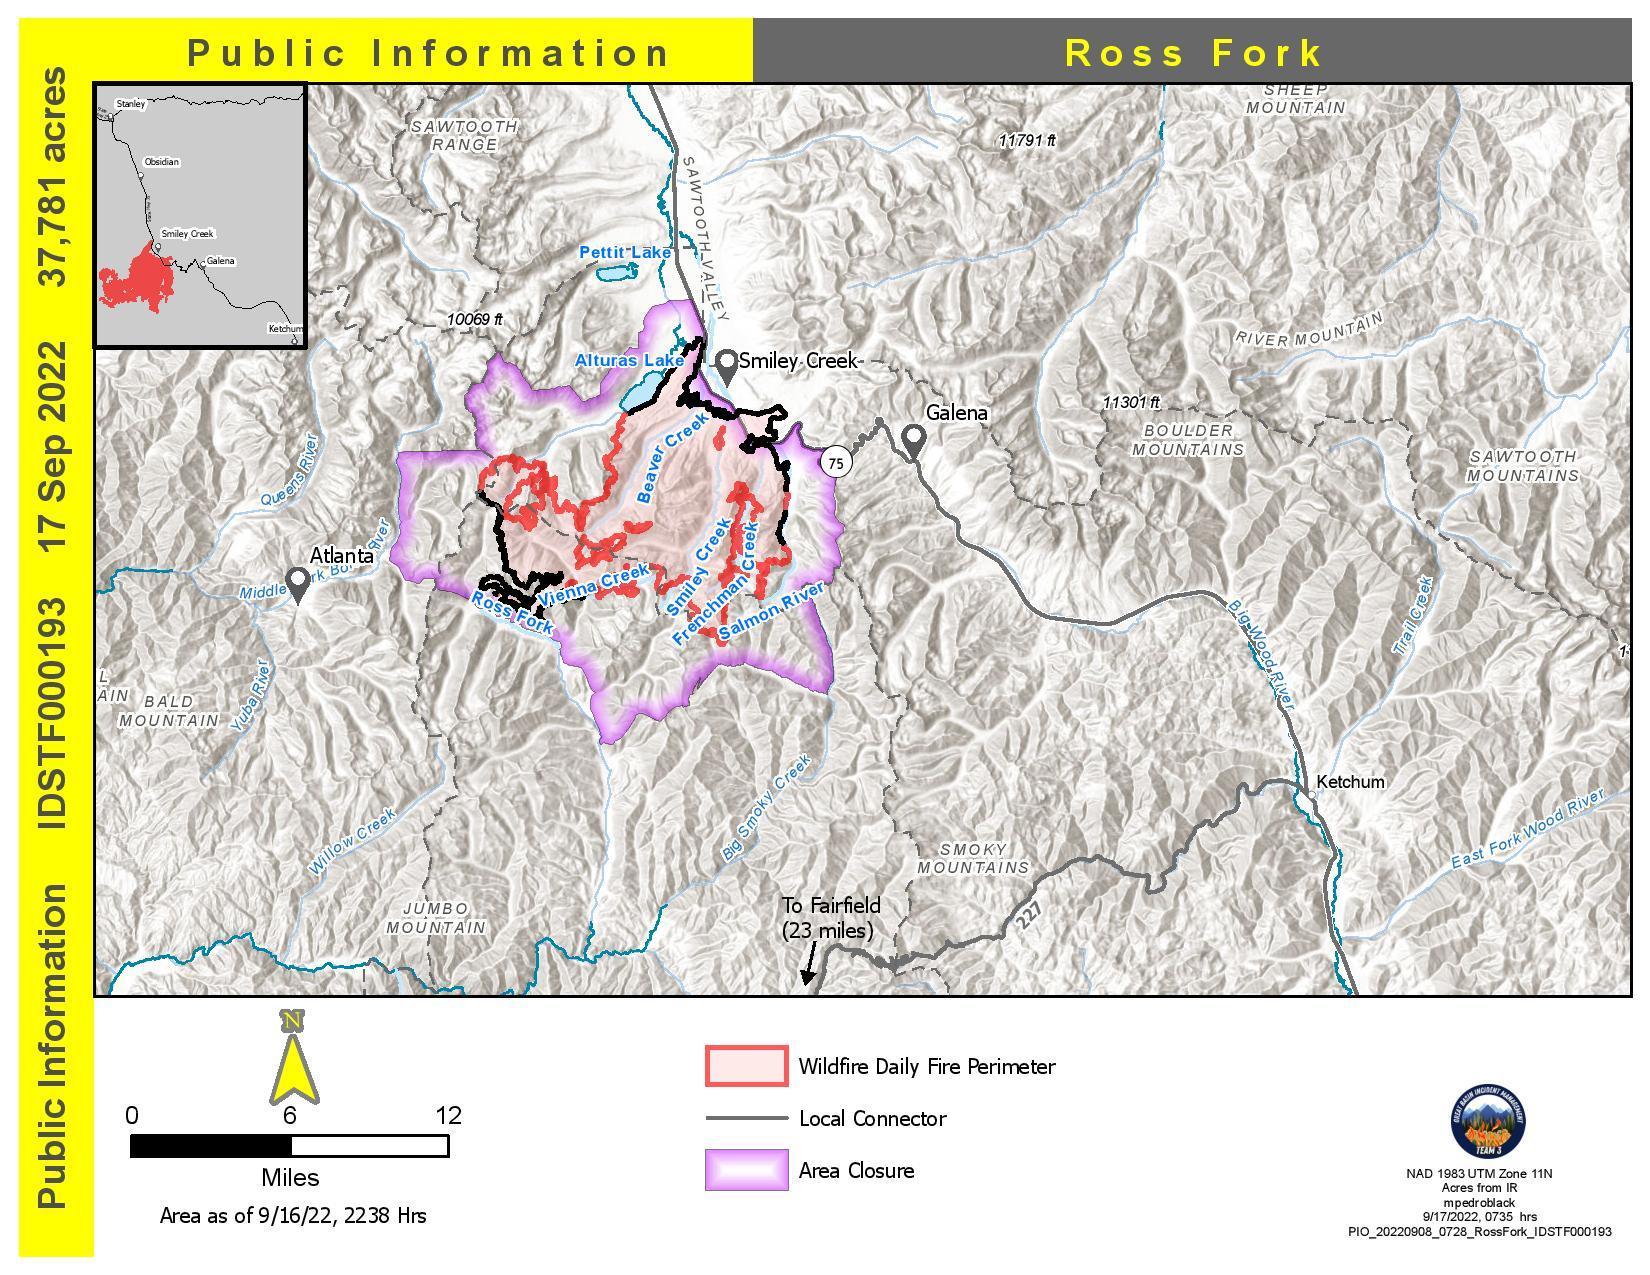 Ross Fork Fire information map, Saturday, Sept 17